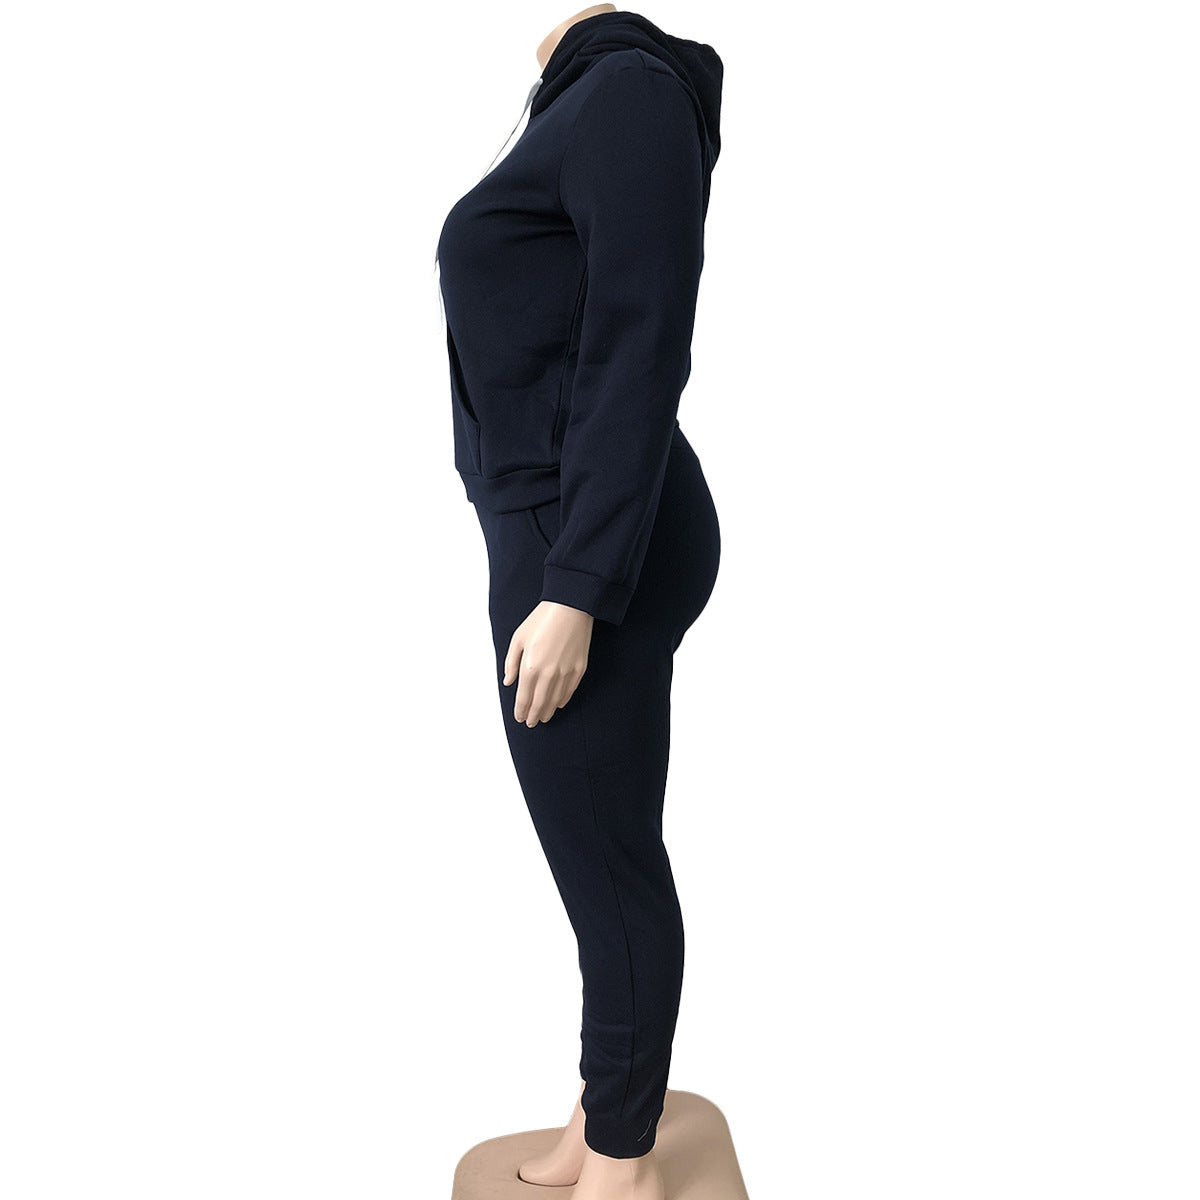 BamBam Plus Size Women's Sports Hoodies Casual Two-Piece Tracksuit Set - BamBam